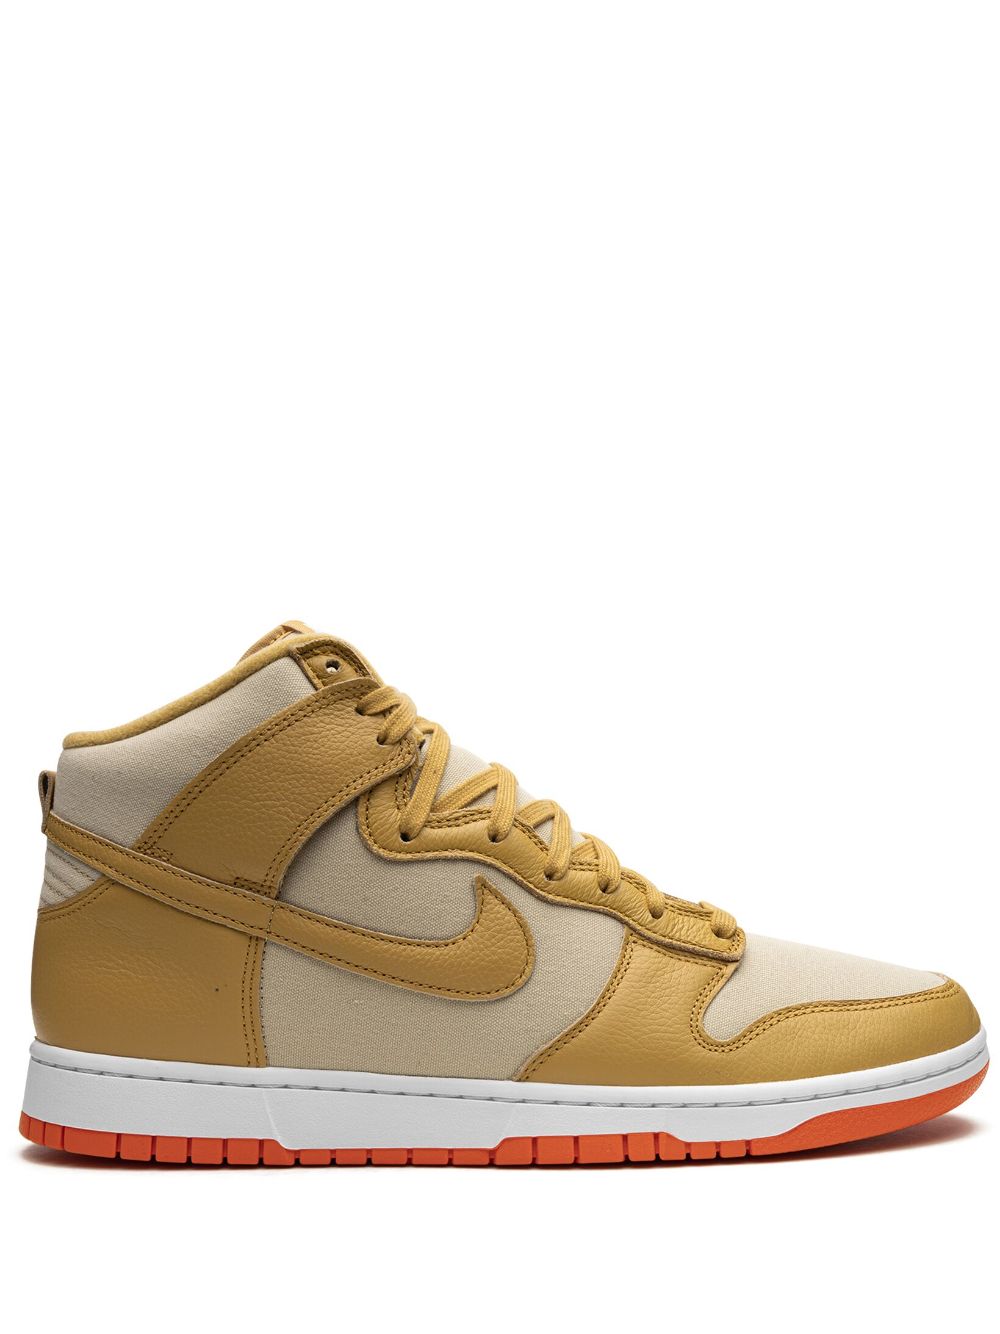 Nike Dunk High "gold Canvas" Trainers